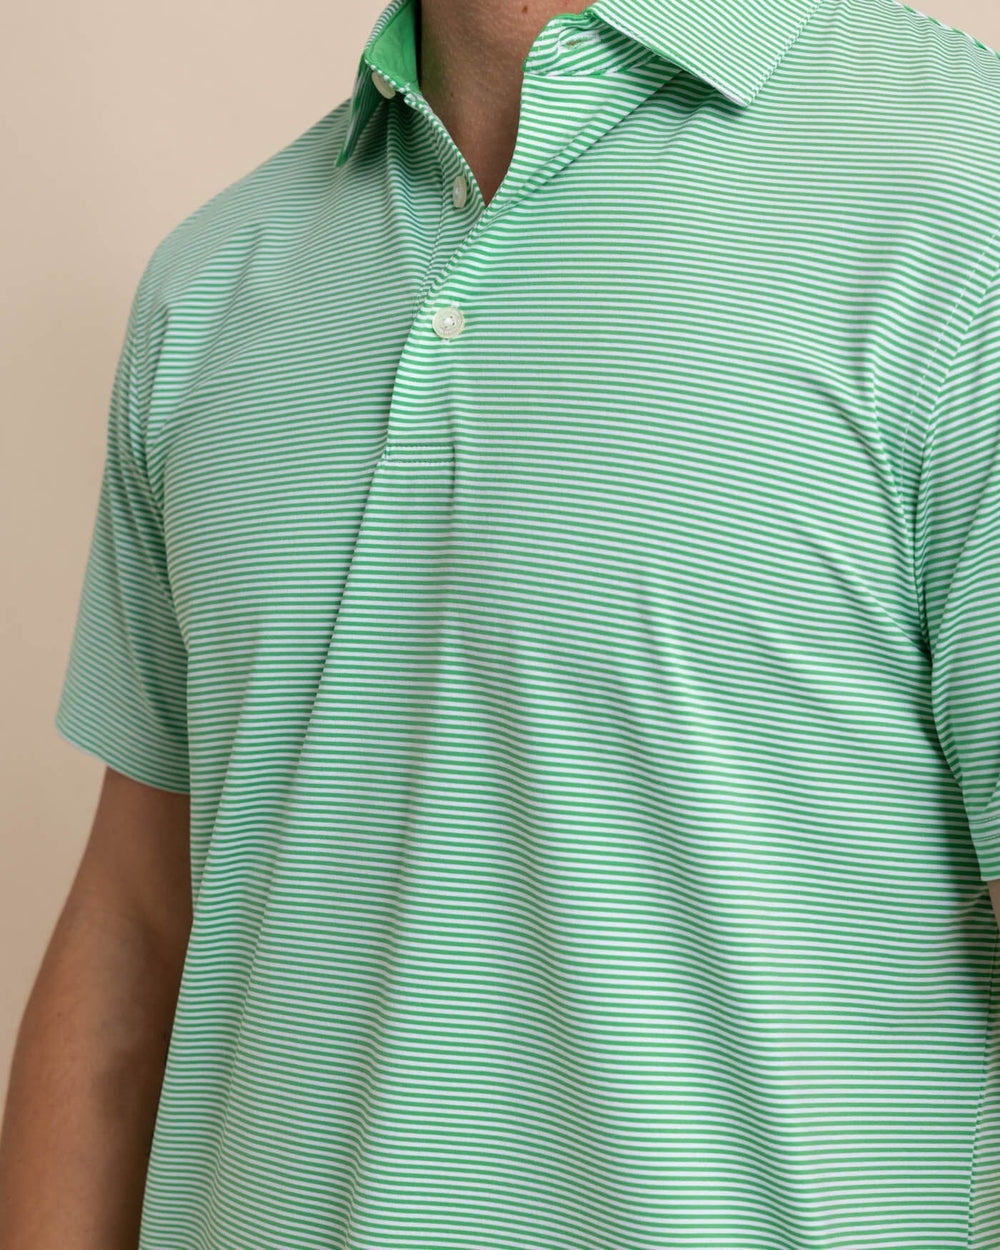 The detail view of the Southern Tide brrr-eeze-meadowbrook-stripe-polo by Southern Tide - Lawn Green